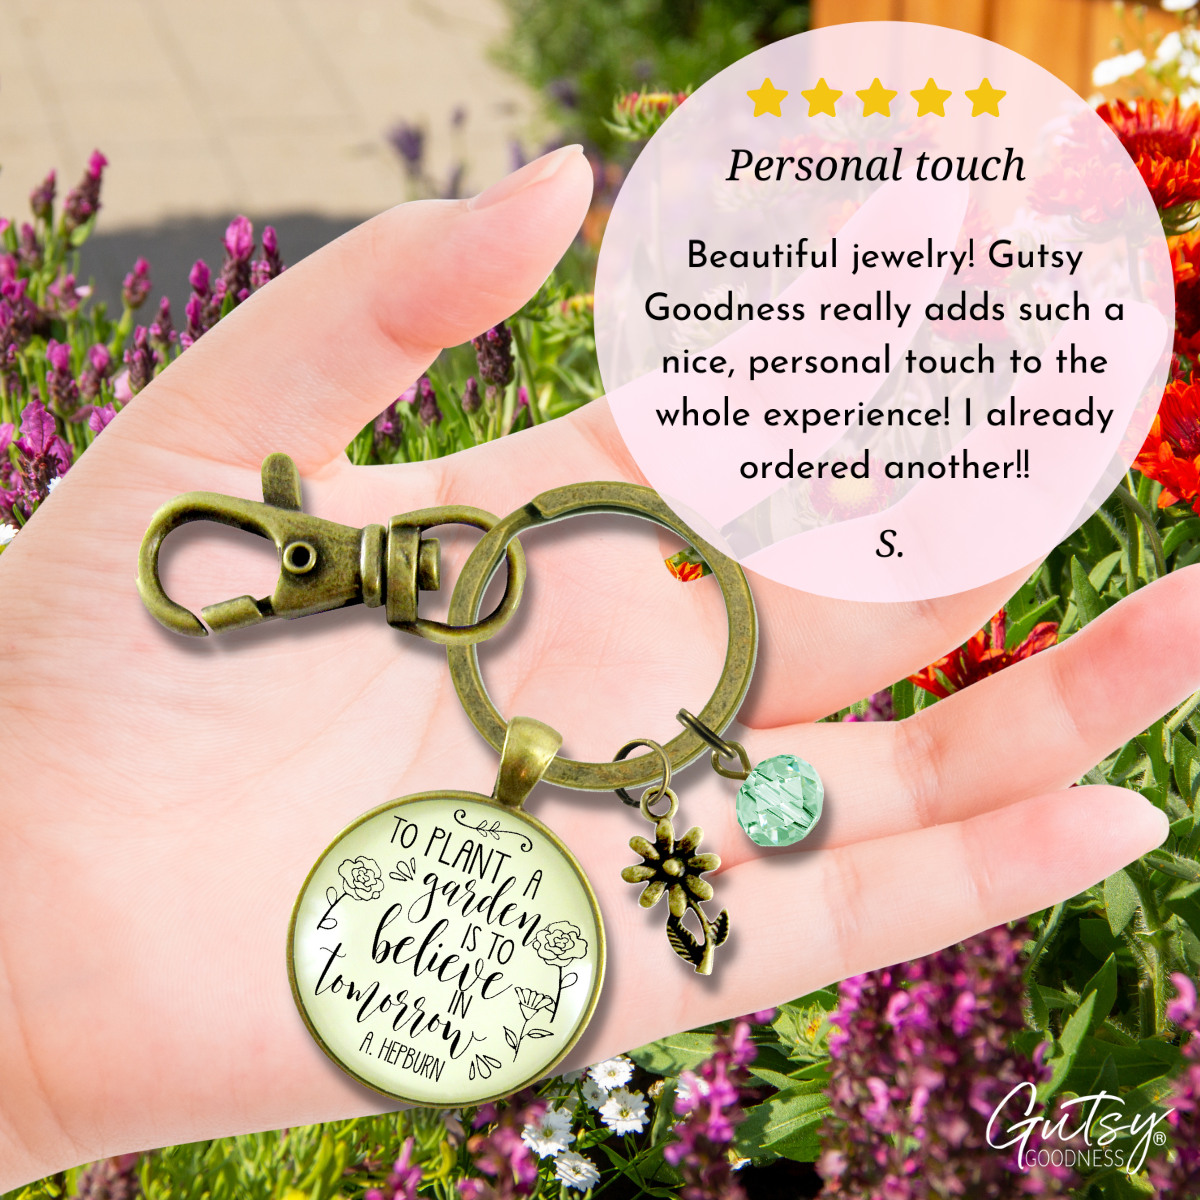 Love To Garden Keychain To Plant a Garden Believe in Tomorrow Quote Gift Jewelry - Gutsy Goodness Handmade Jewelry;Love To Garden Keychain To Plant A Garden Believe In Tomorrow Quote Gift Jewelry - Gutsy Goodness Handmade Jewelry Gifts